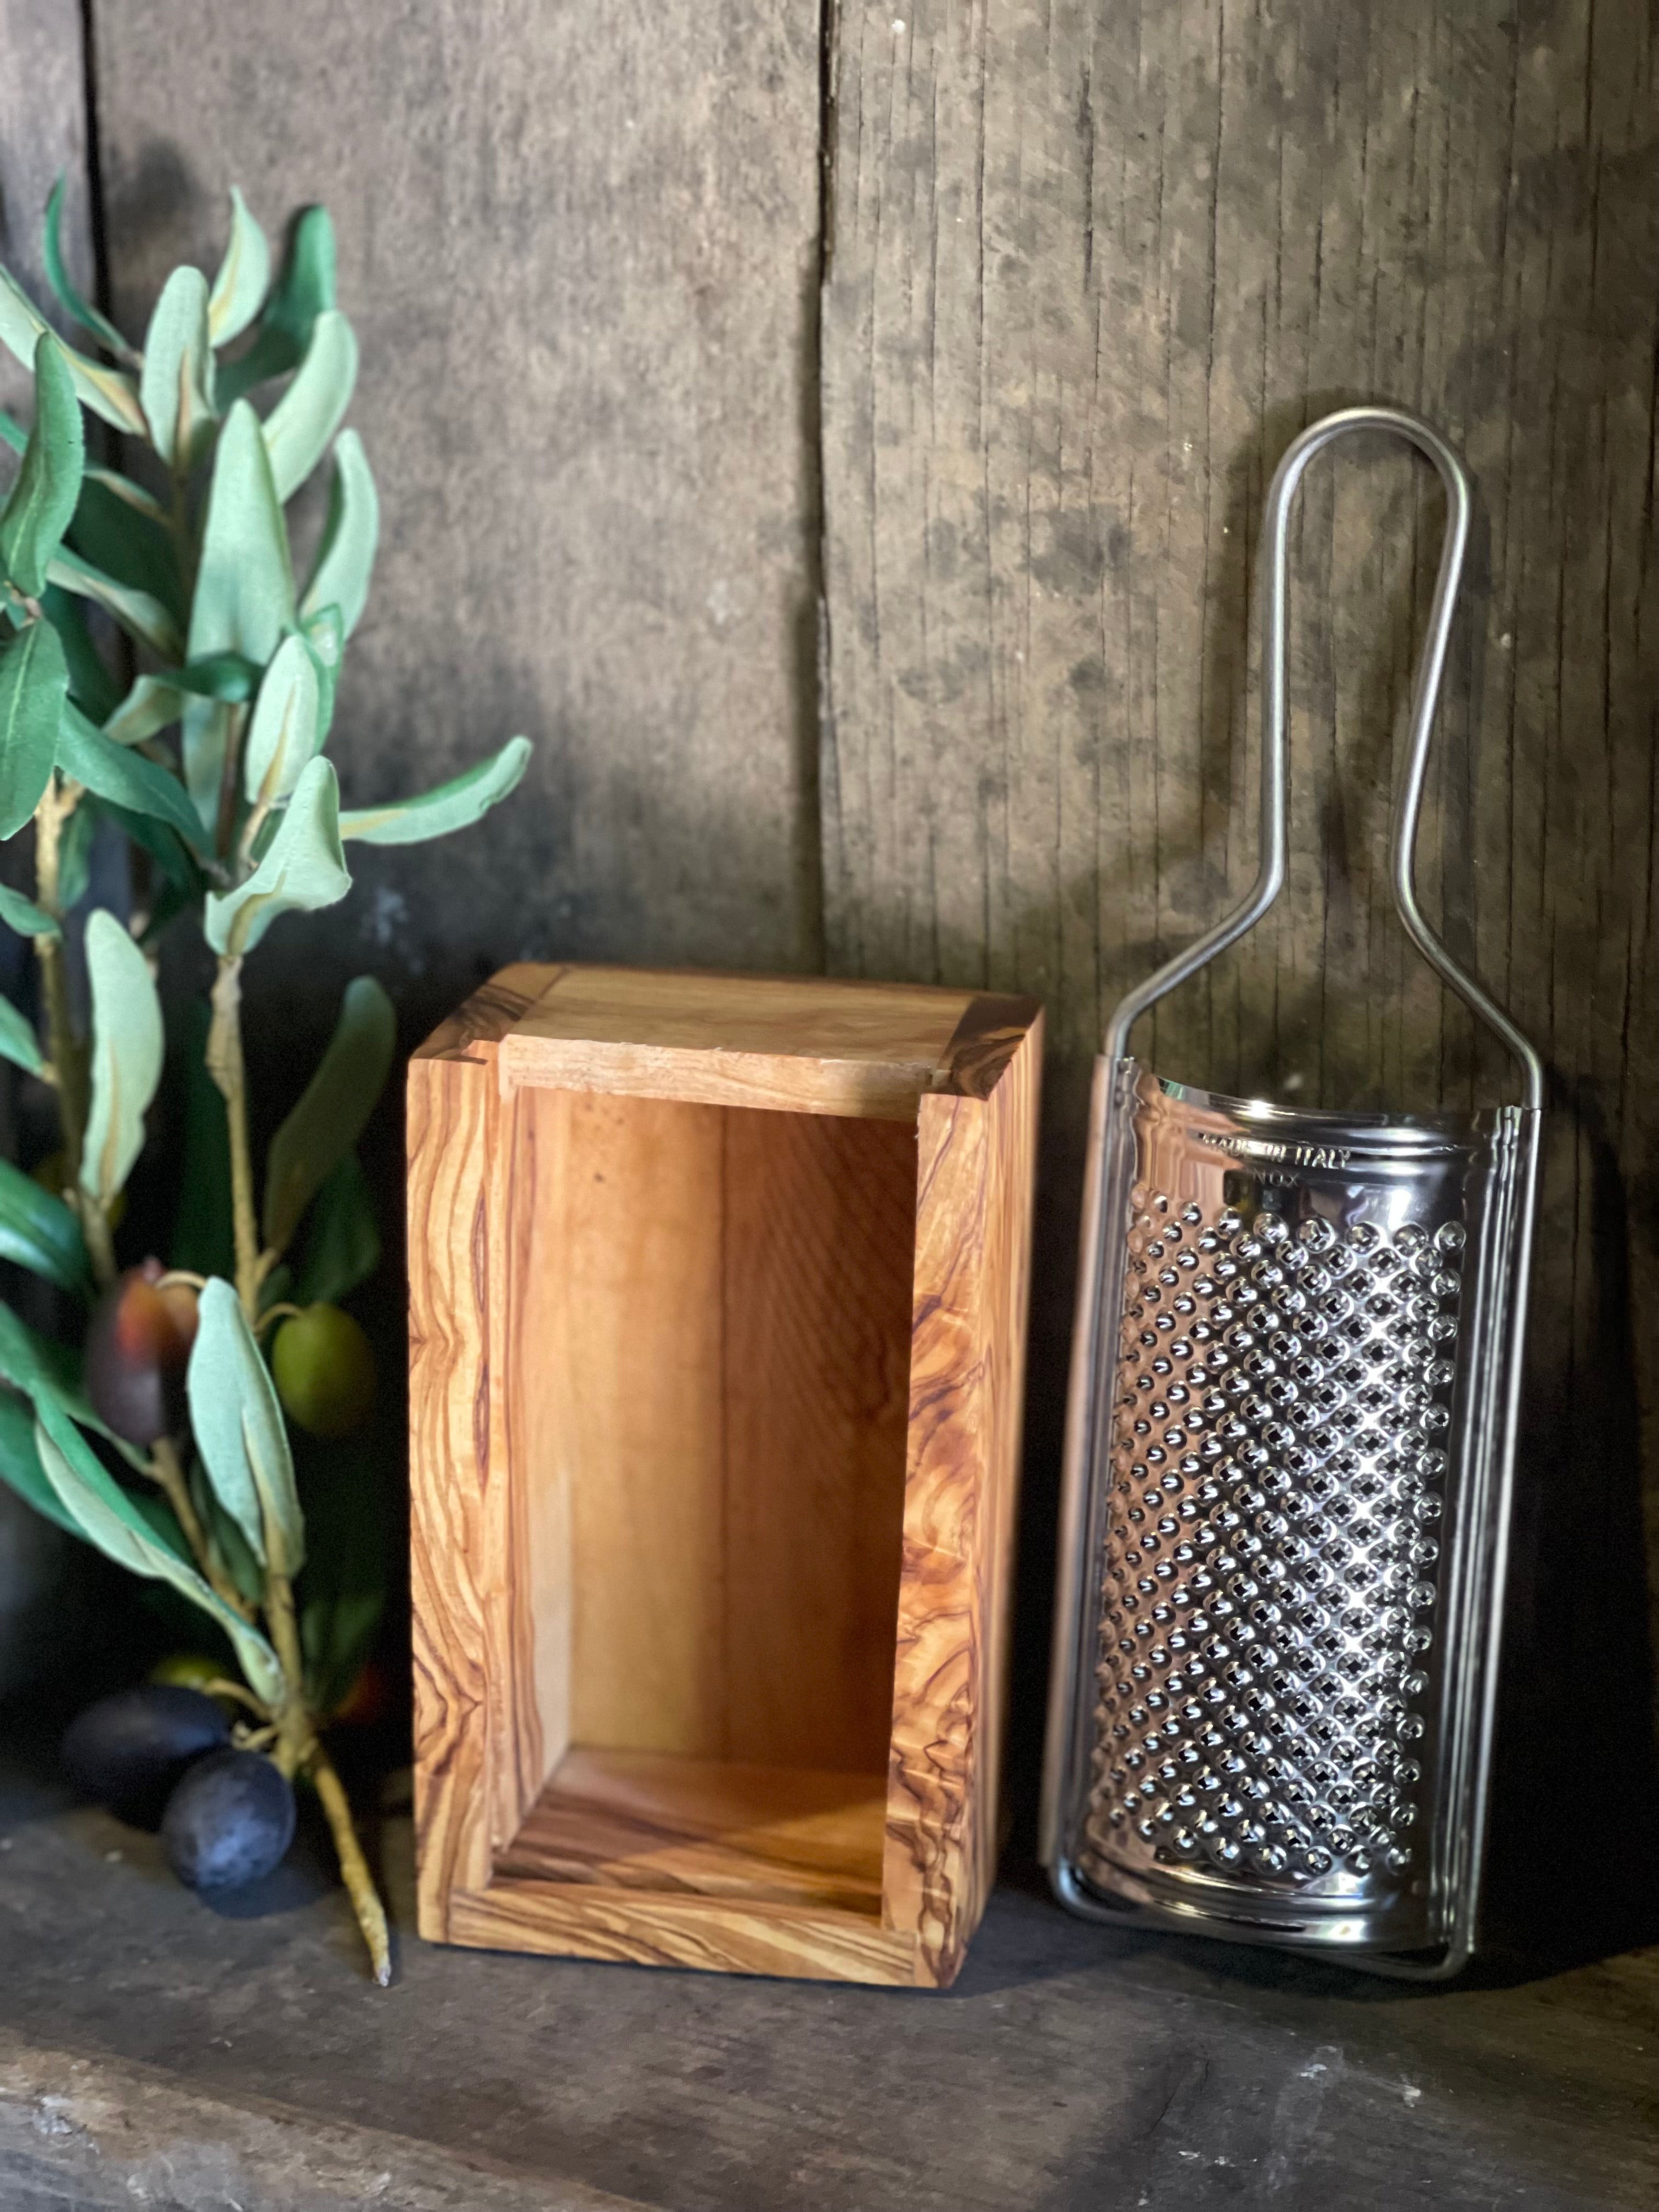 Parmesan / cheese grater made of olive wood